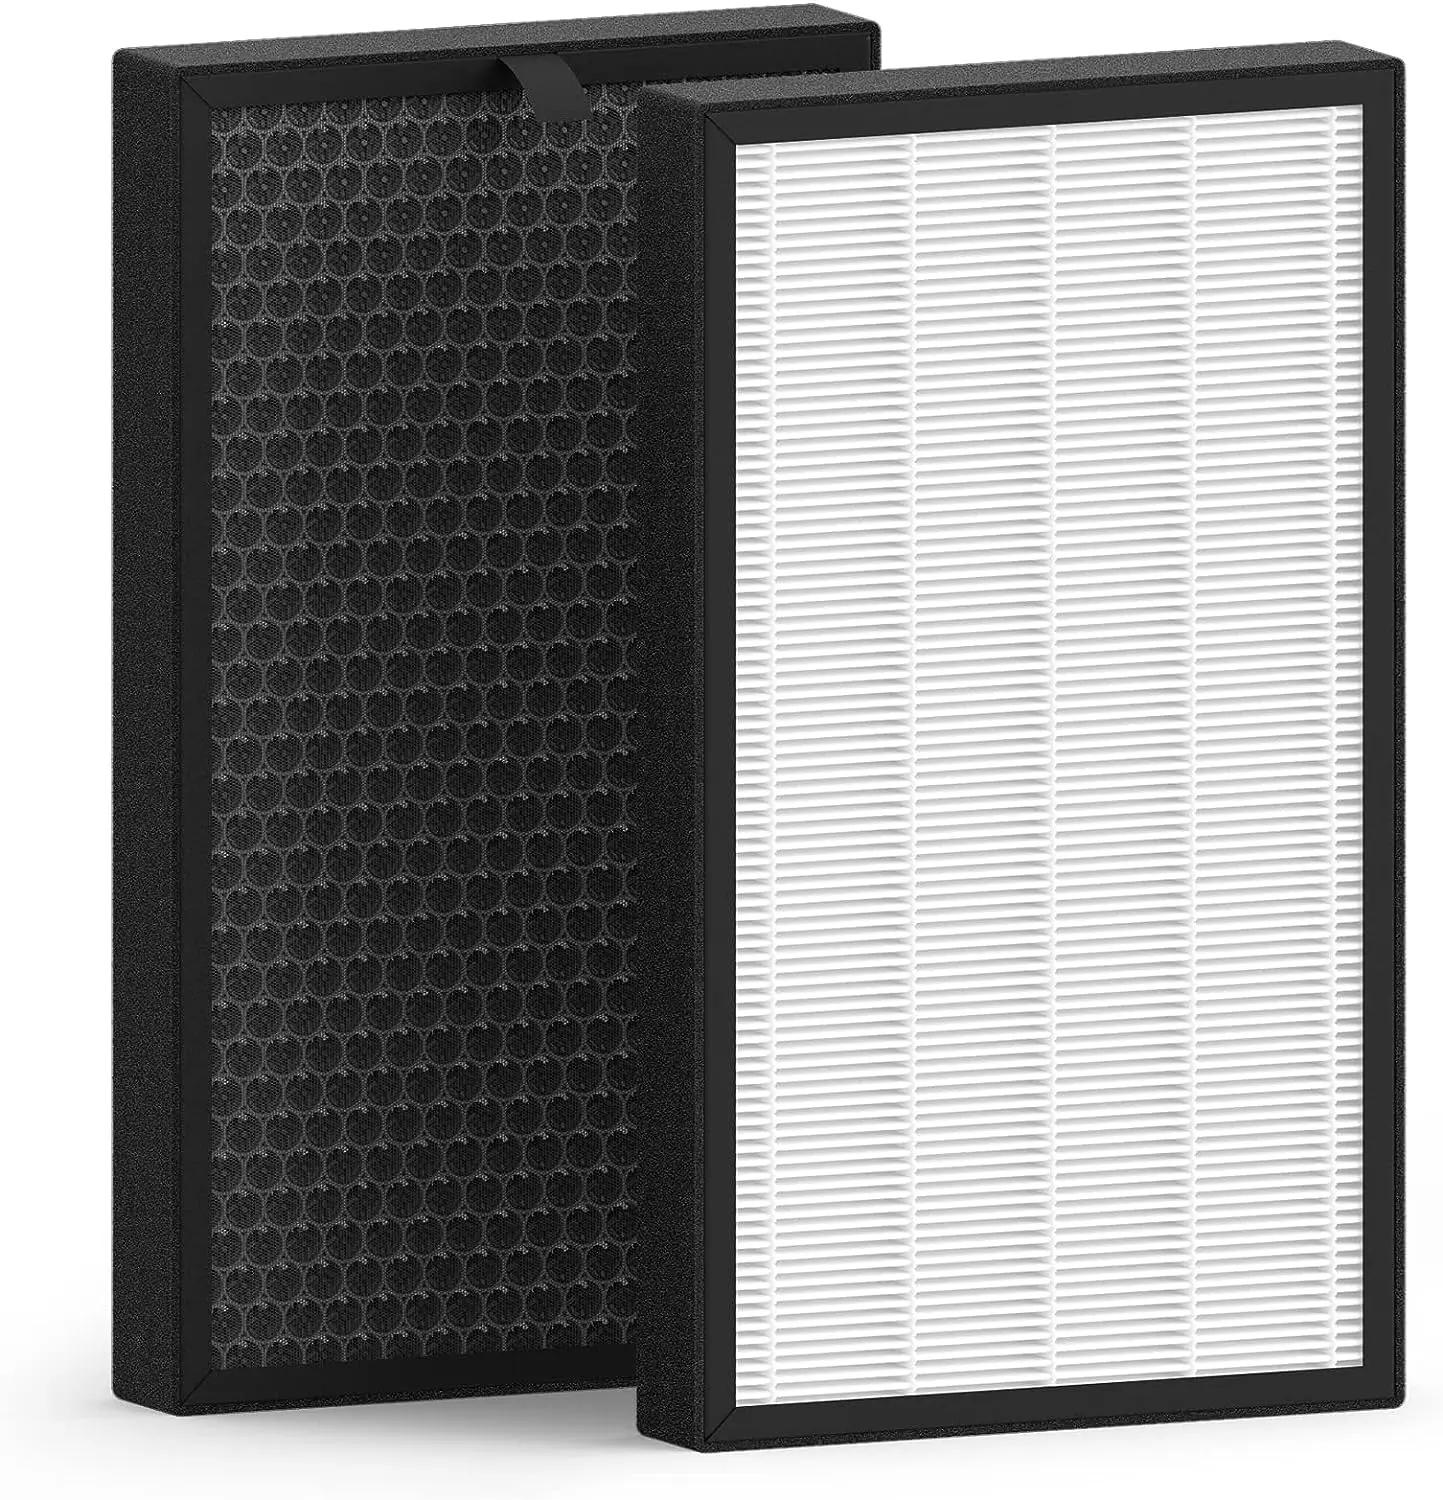 

Replacement Filter for TOSOT Air Cleaner Purifier KJ350G, True HEPA High-Efficiency Activated Carbon Filter, 2 Pack